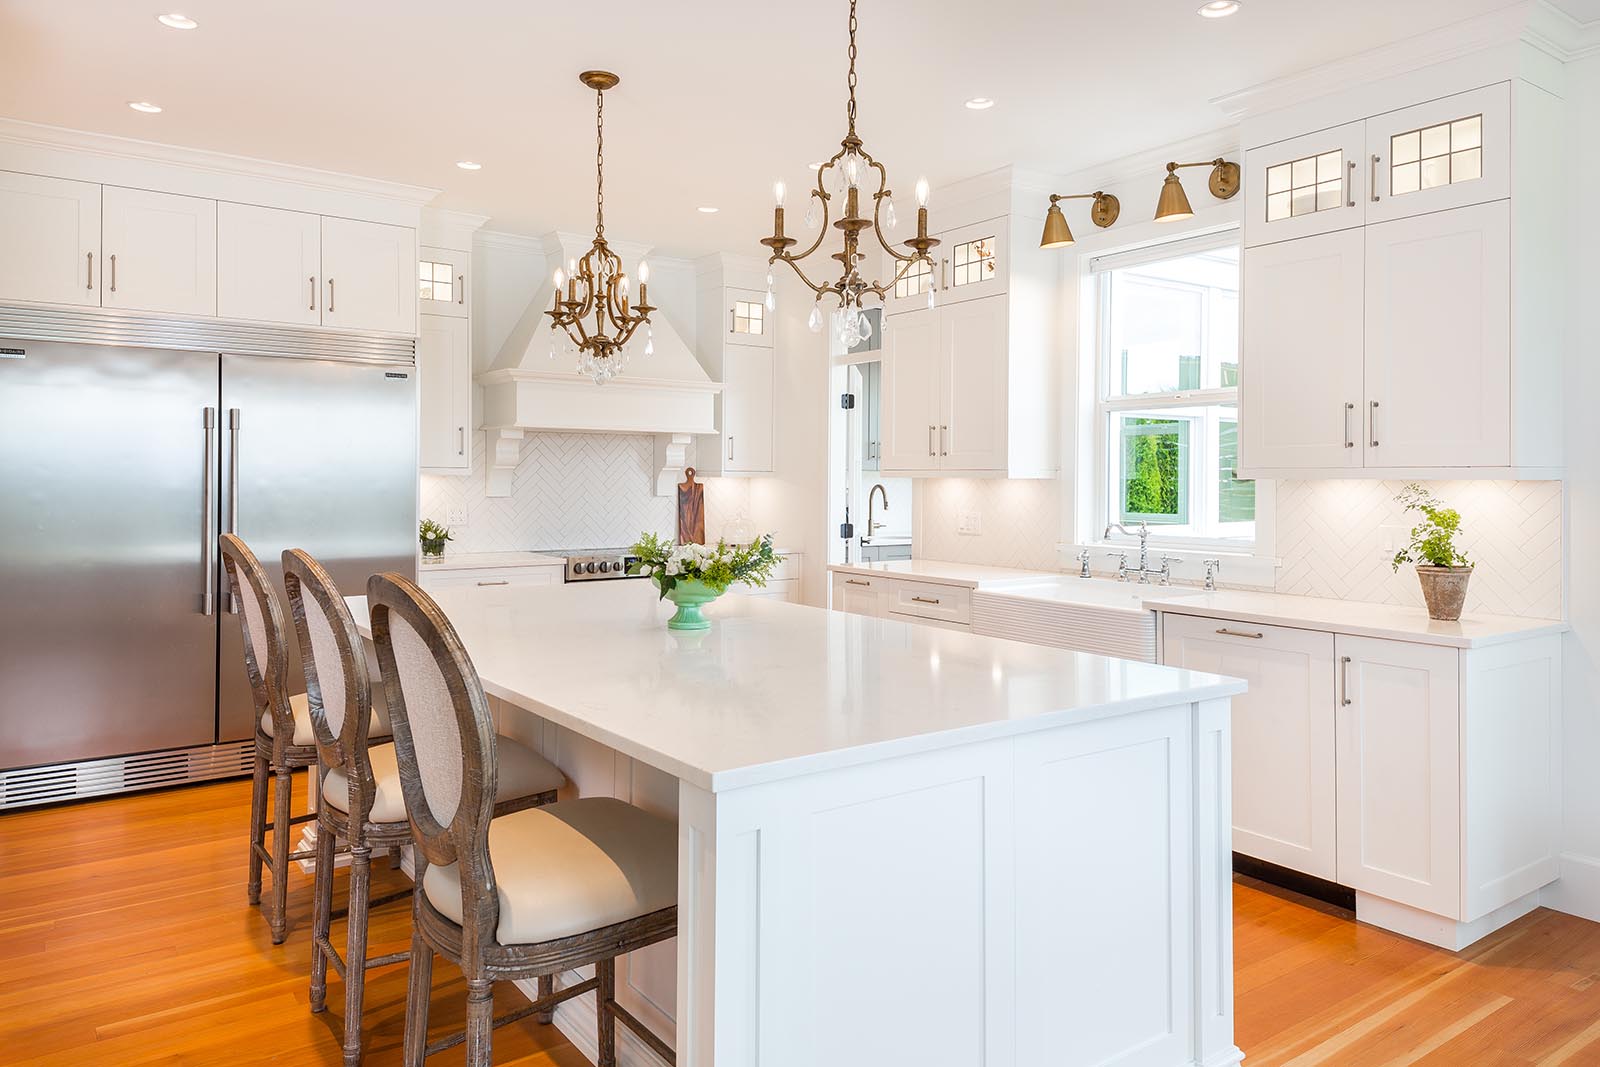 How to Get the Most Out of Your Kitchen Renovation